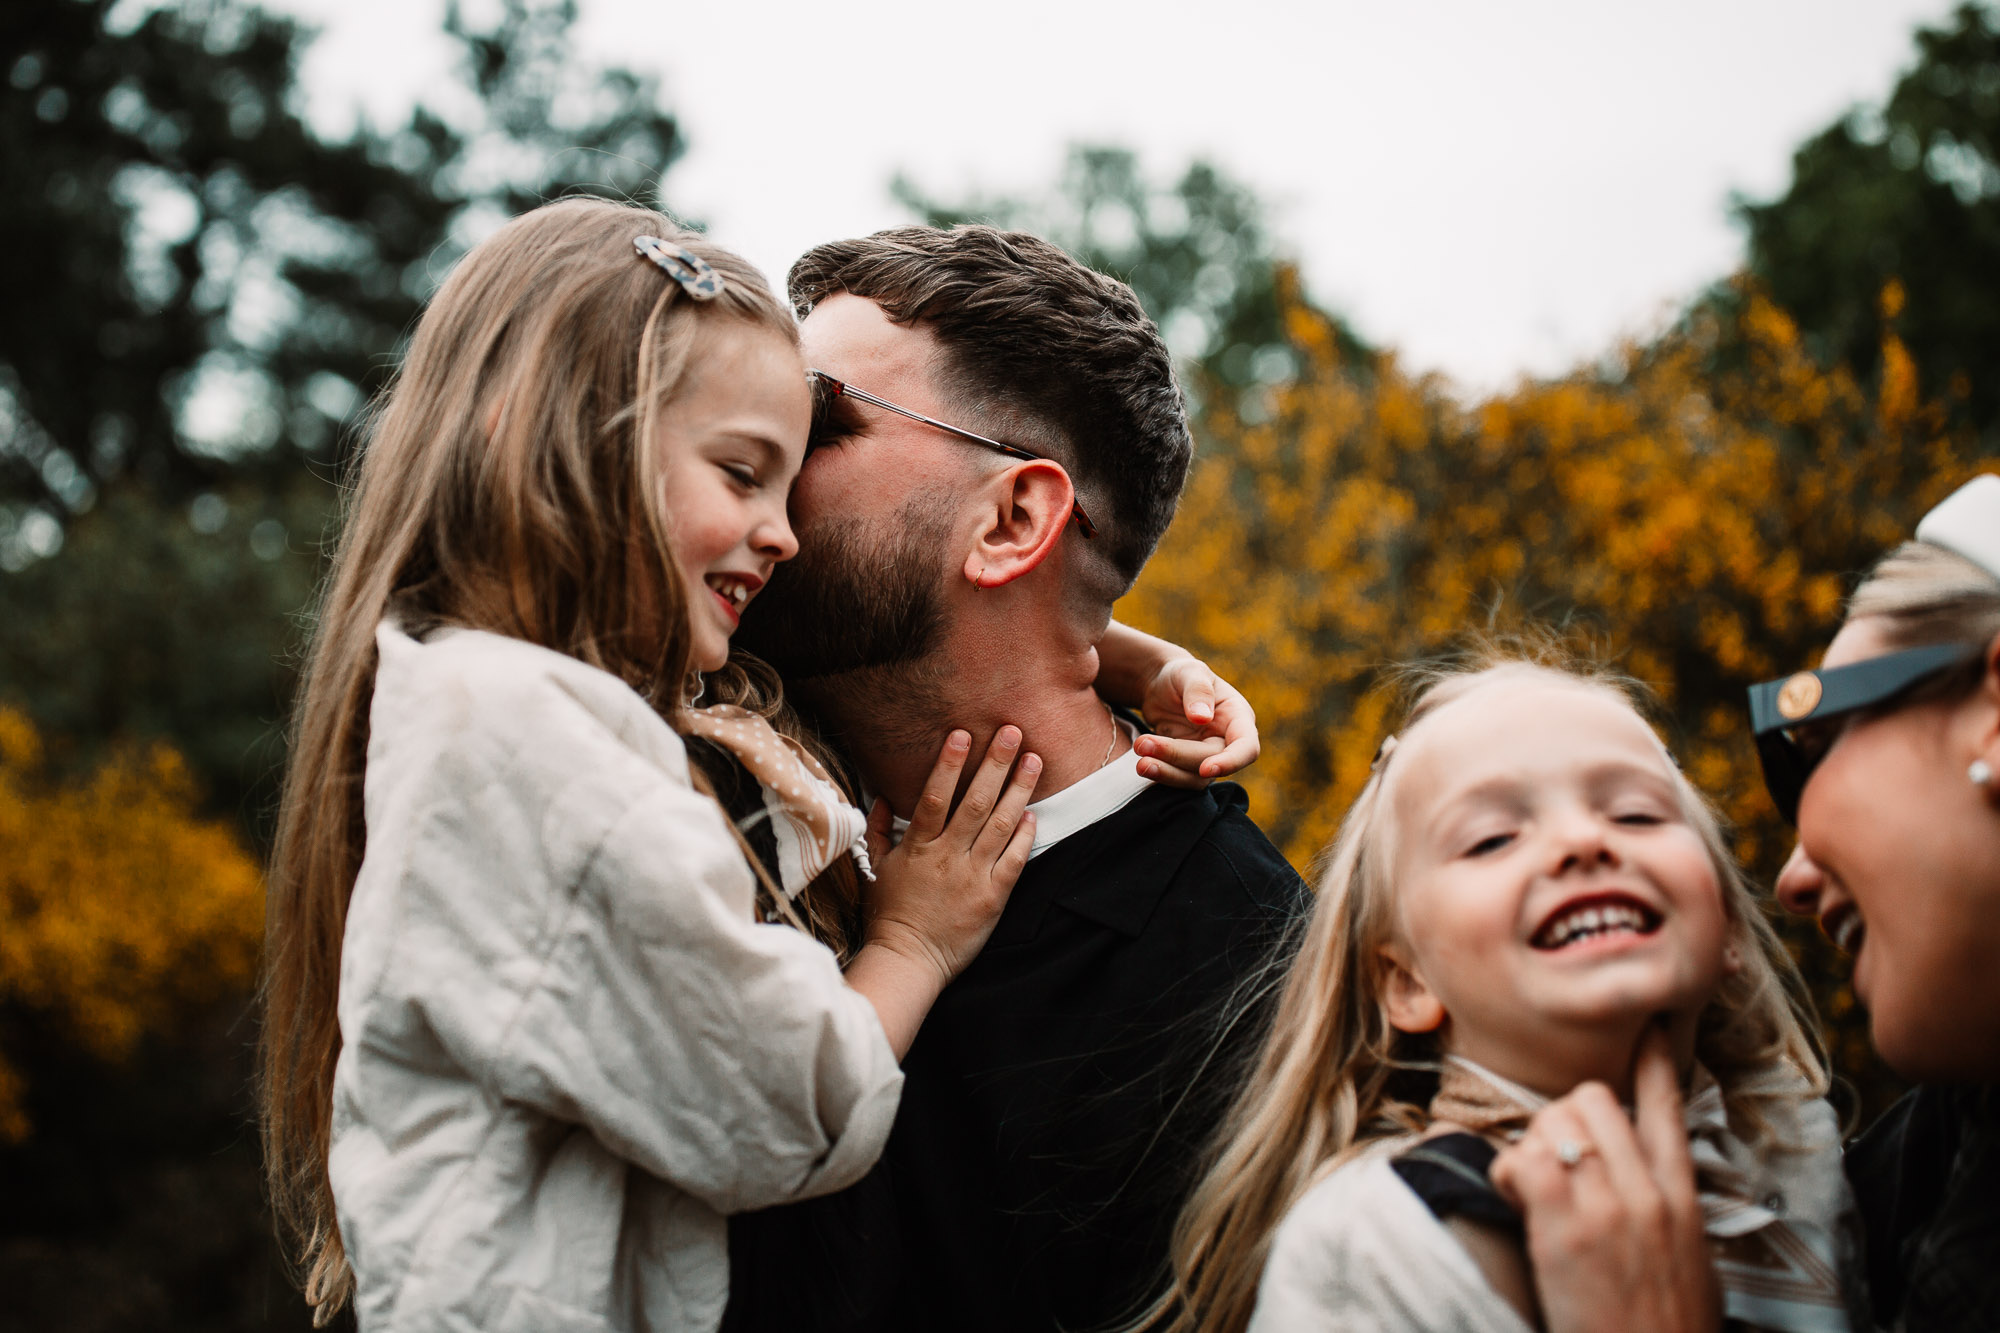 dad kissing daughter in the forest on the cheek